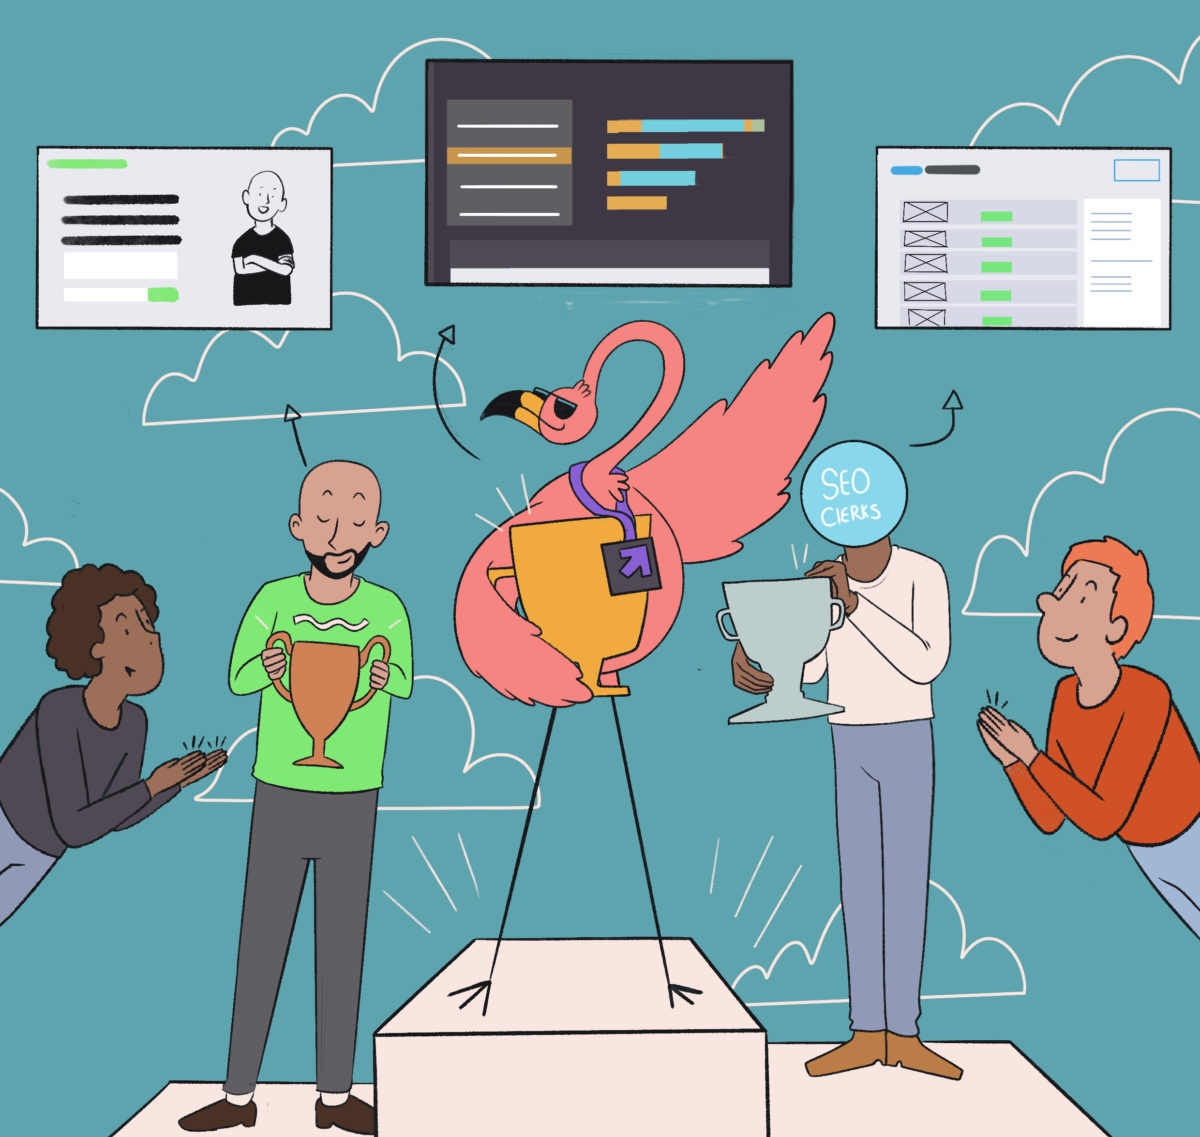 A colorful illustration of four people celebrating an accomplishment with a flamingo mascot standing on a winner's podium, surrounded by symbols of business success and strategy.